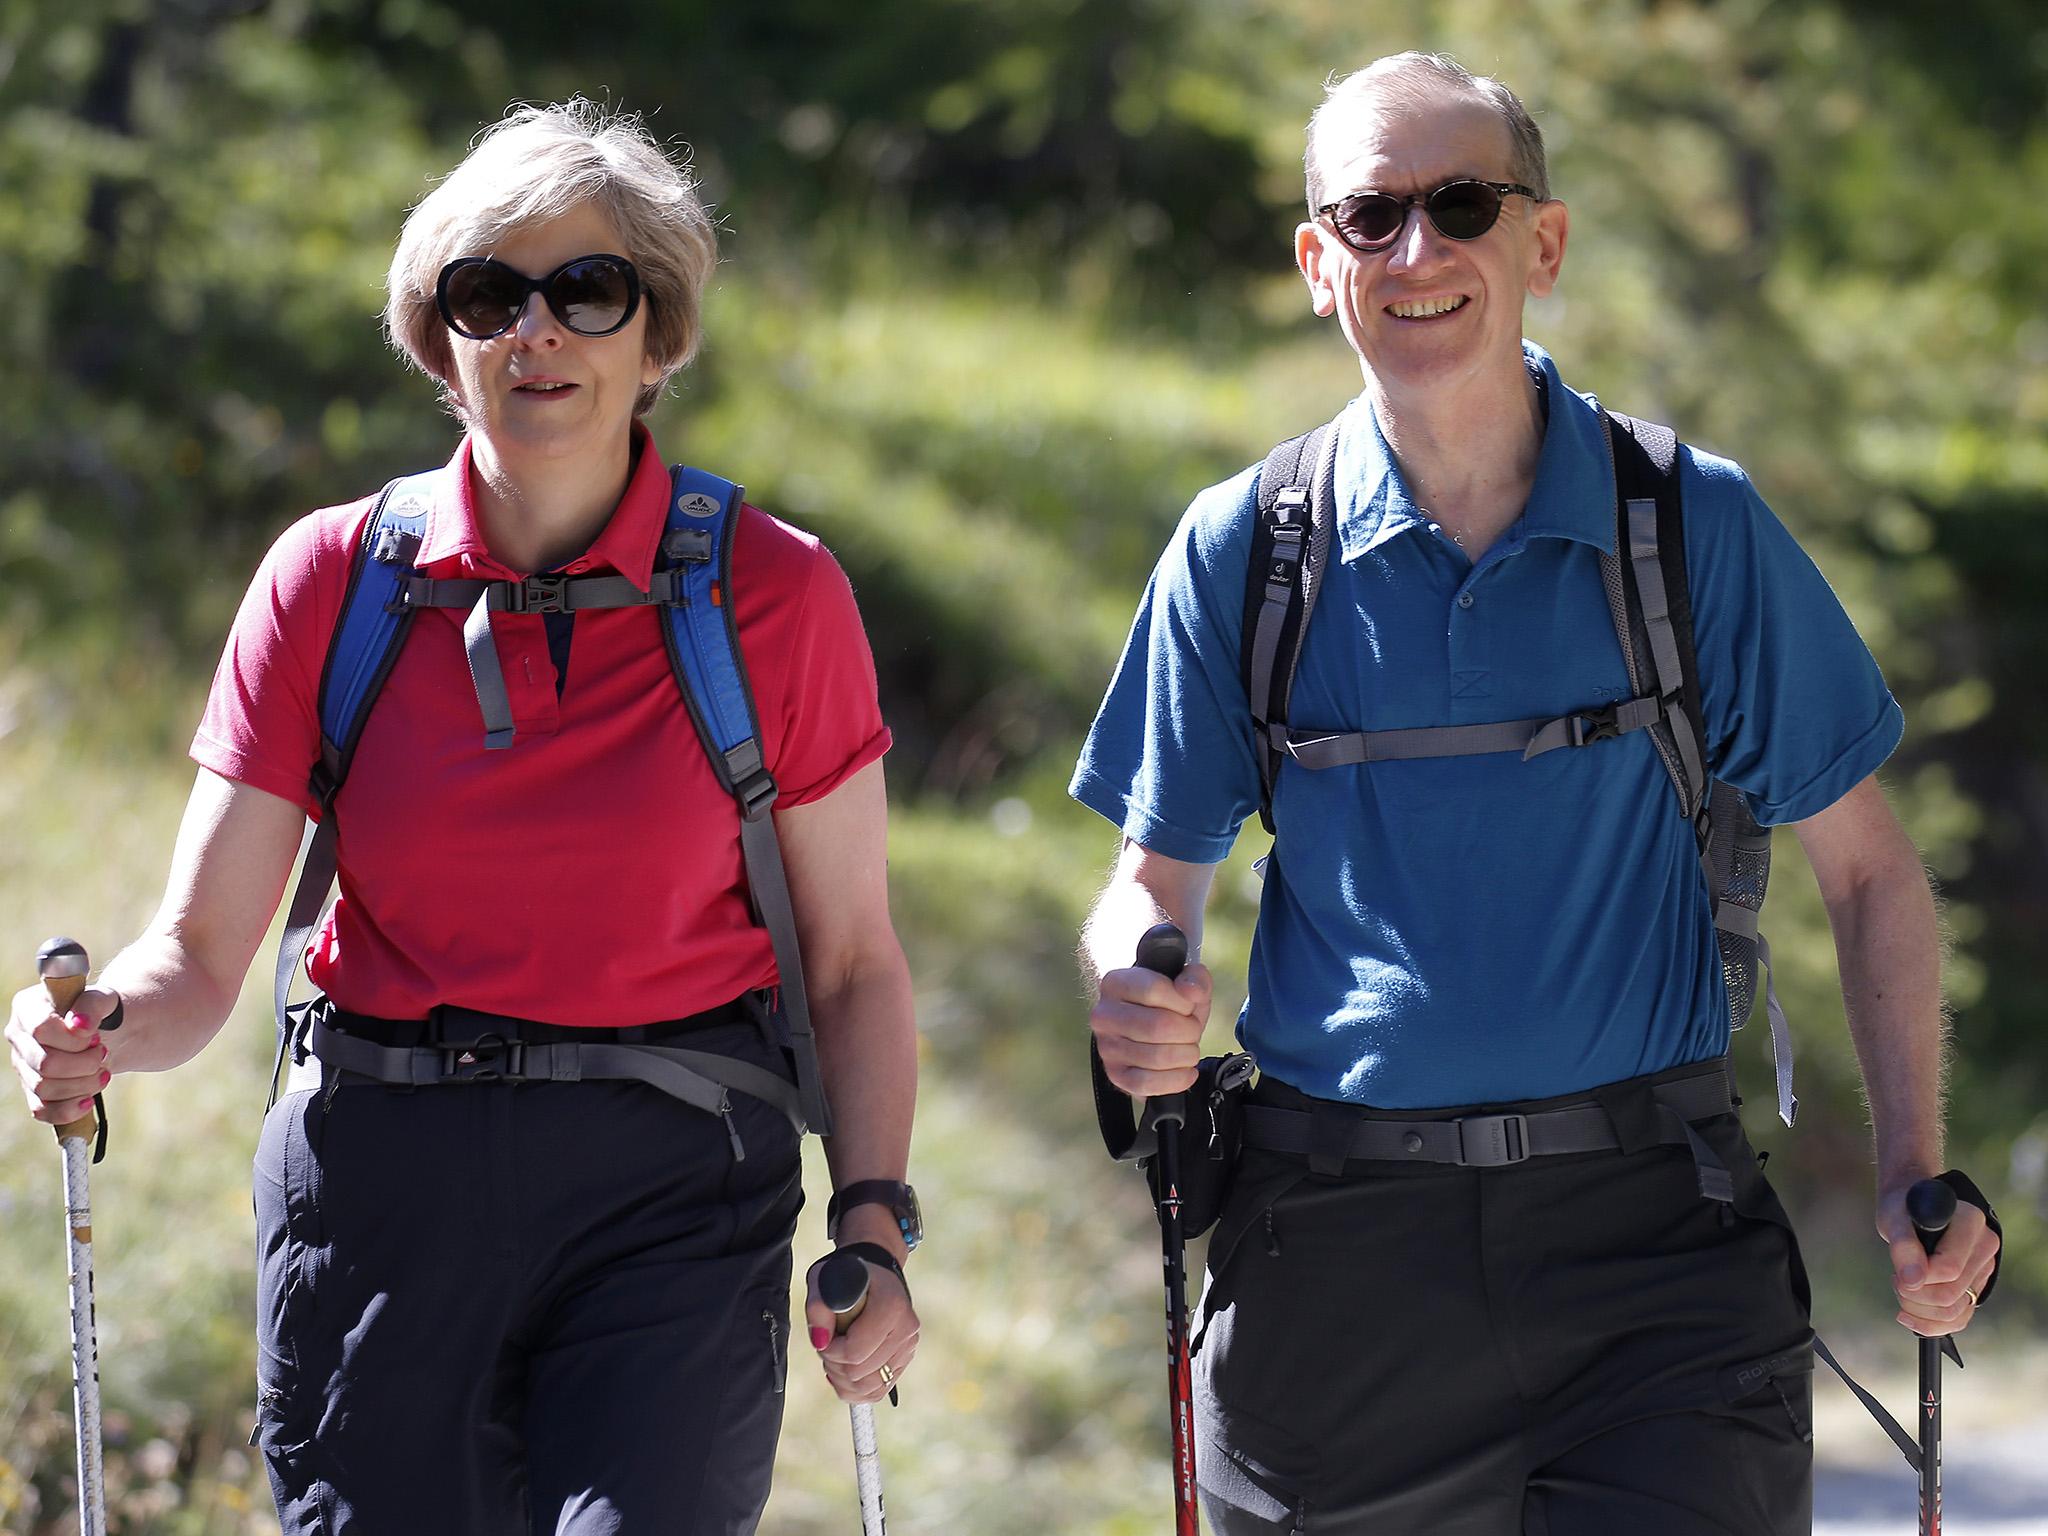 Theresa May’s trip to the Alps with husband Philip reminds us of a simpler time before gold-taps-and-private-jets Eurotrash vulgarity